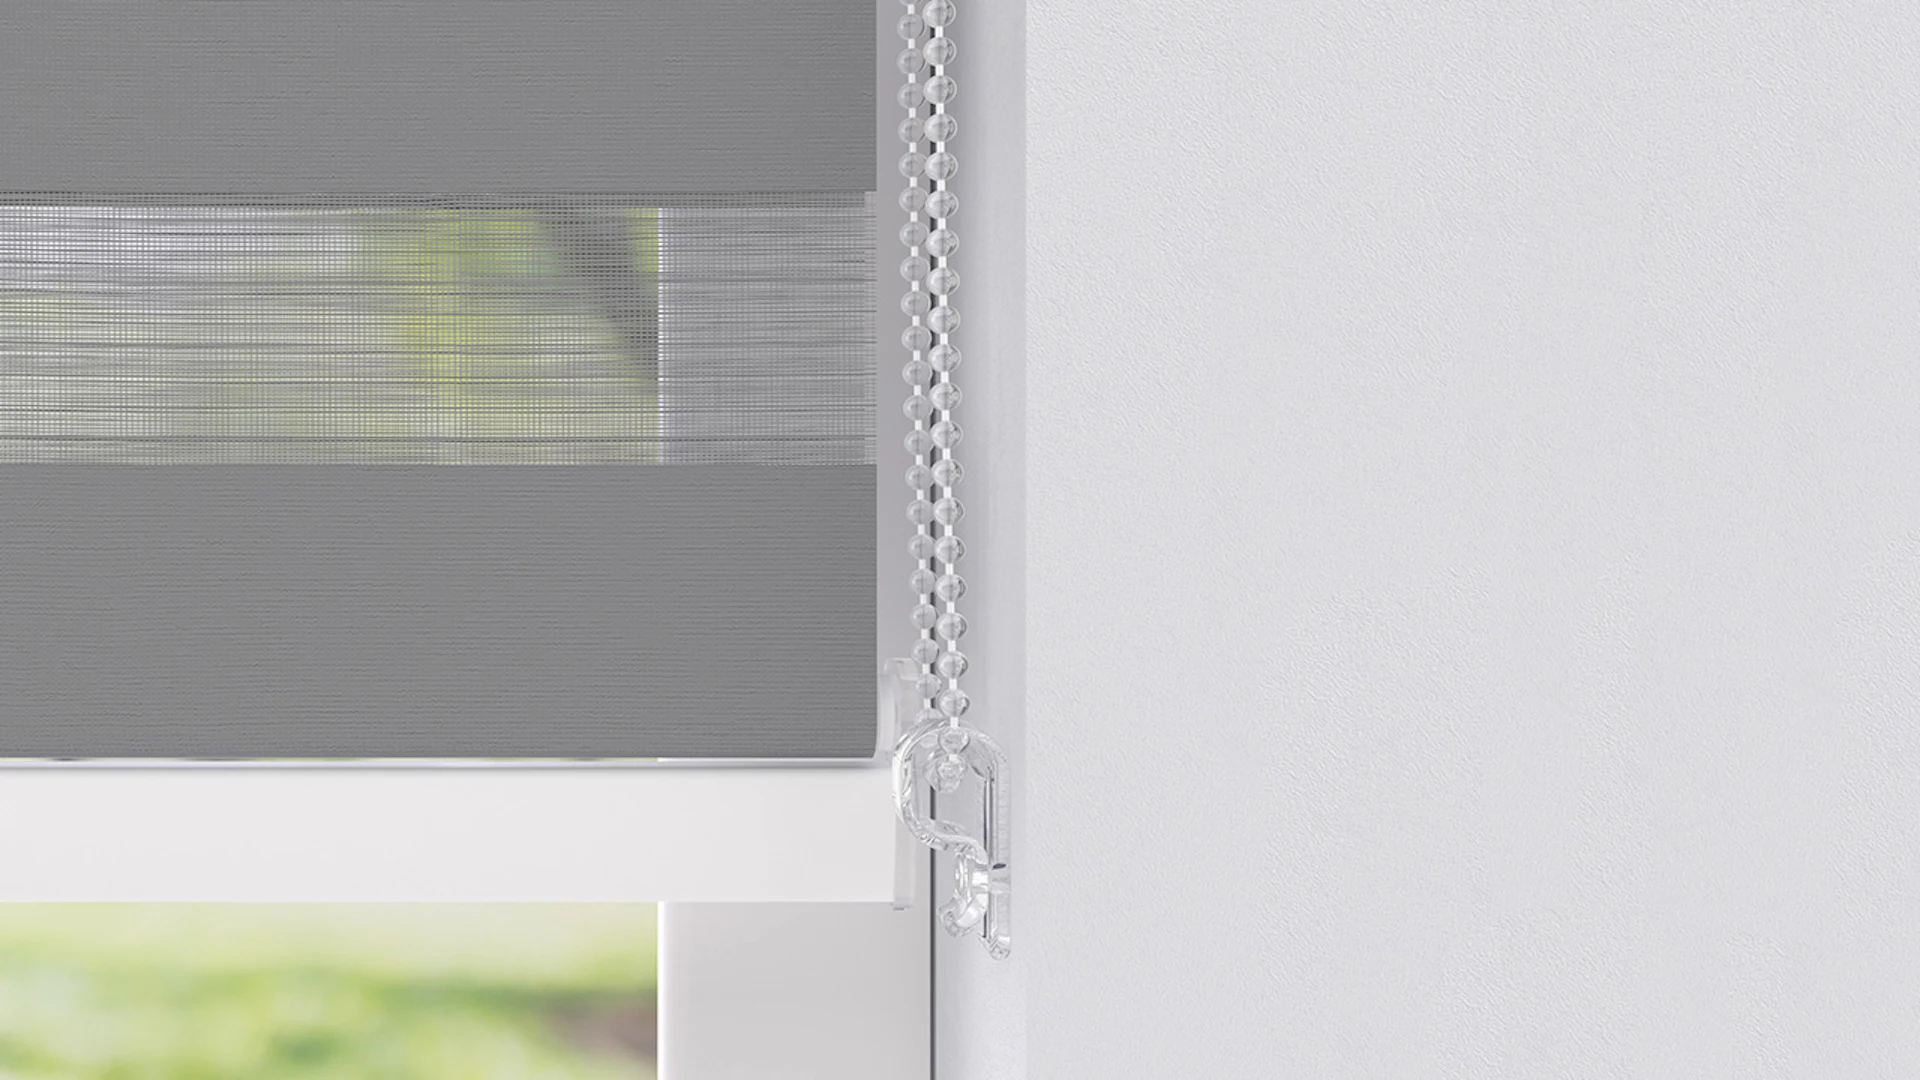 planeo double roller blind 28mm TL head profile - grey 85 x 175 cm